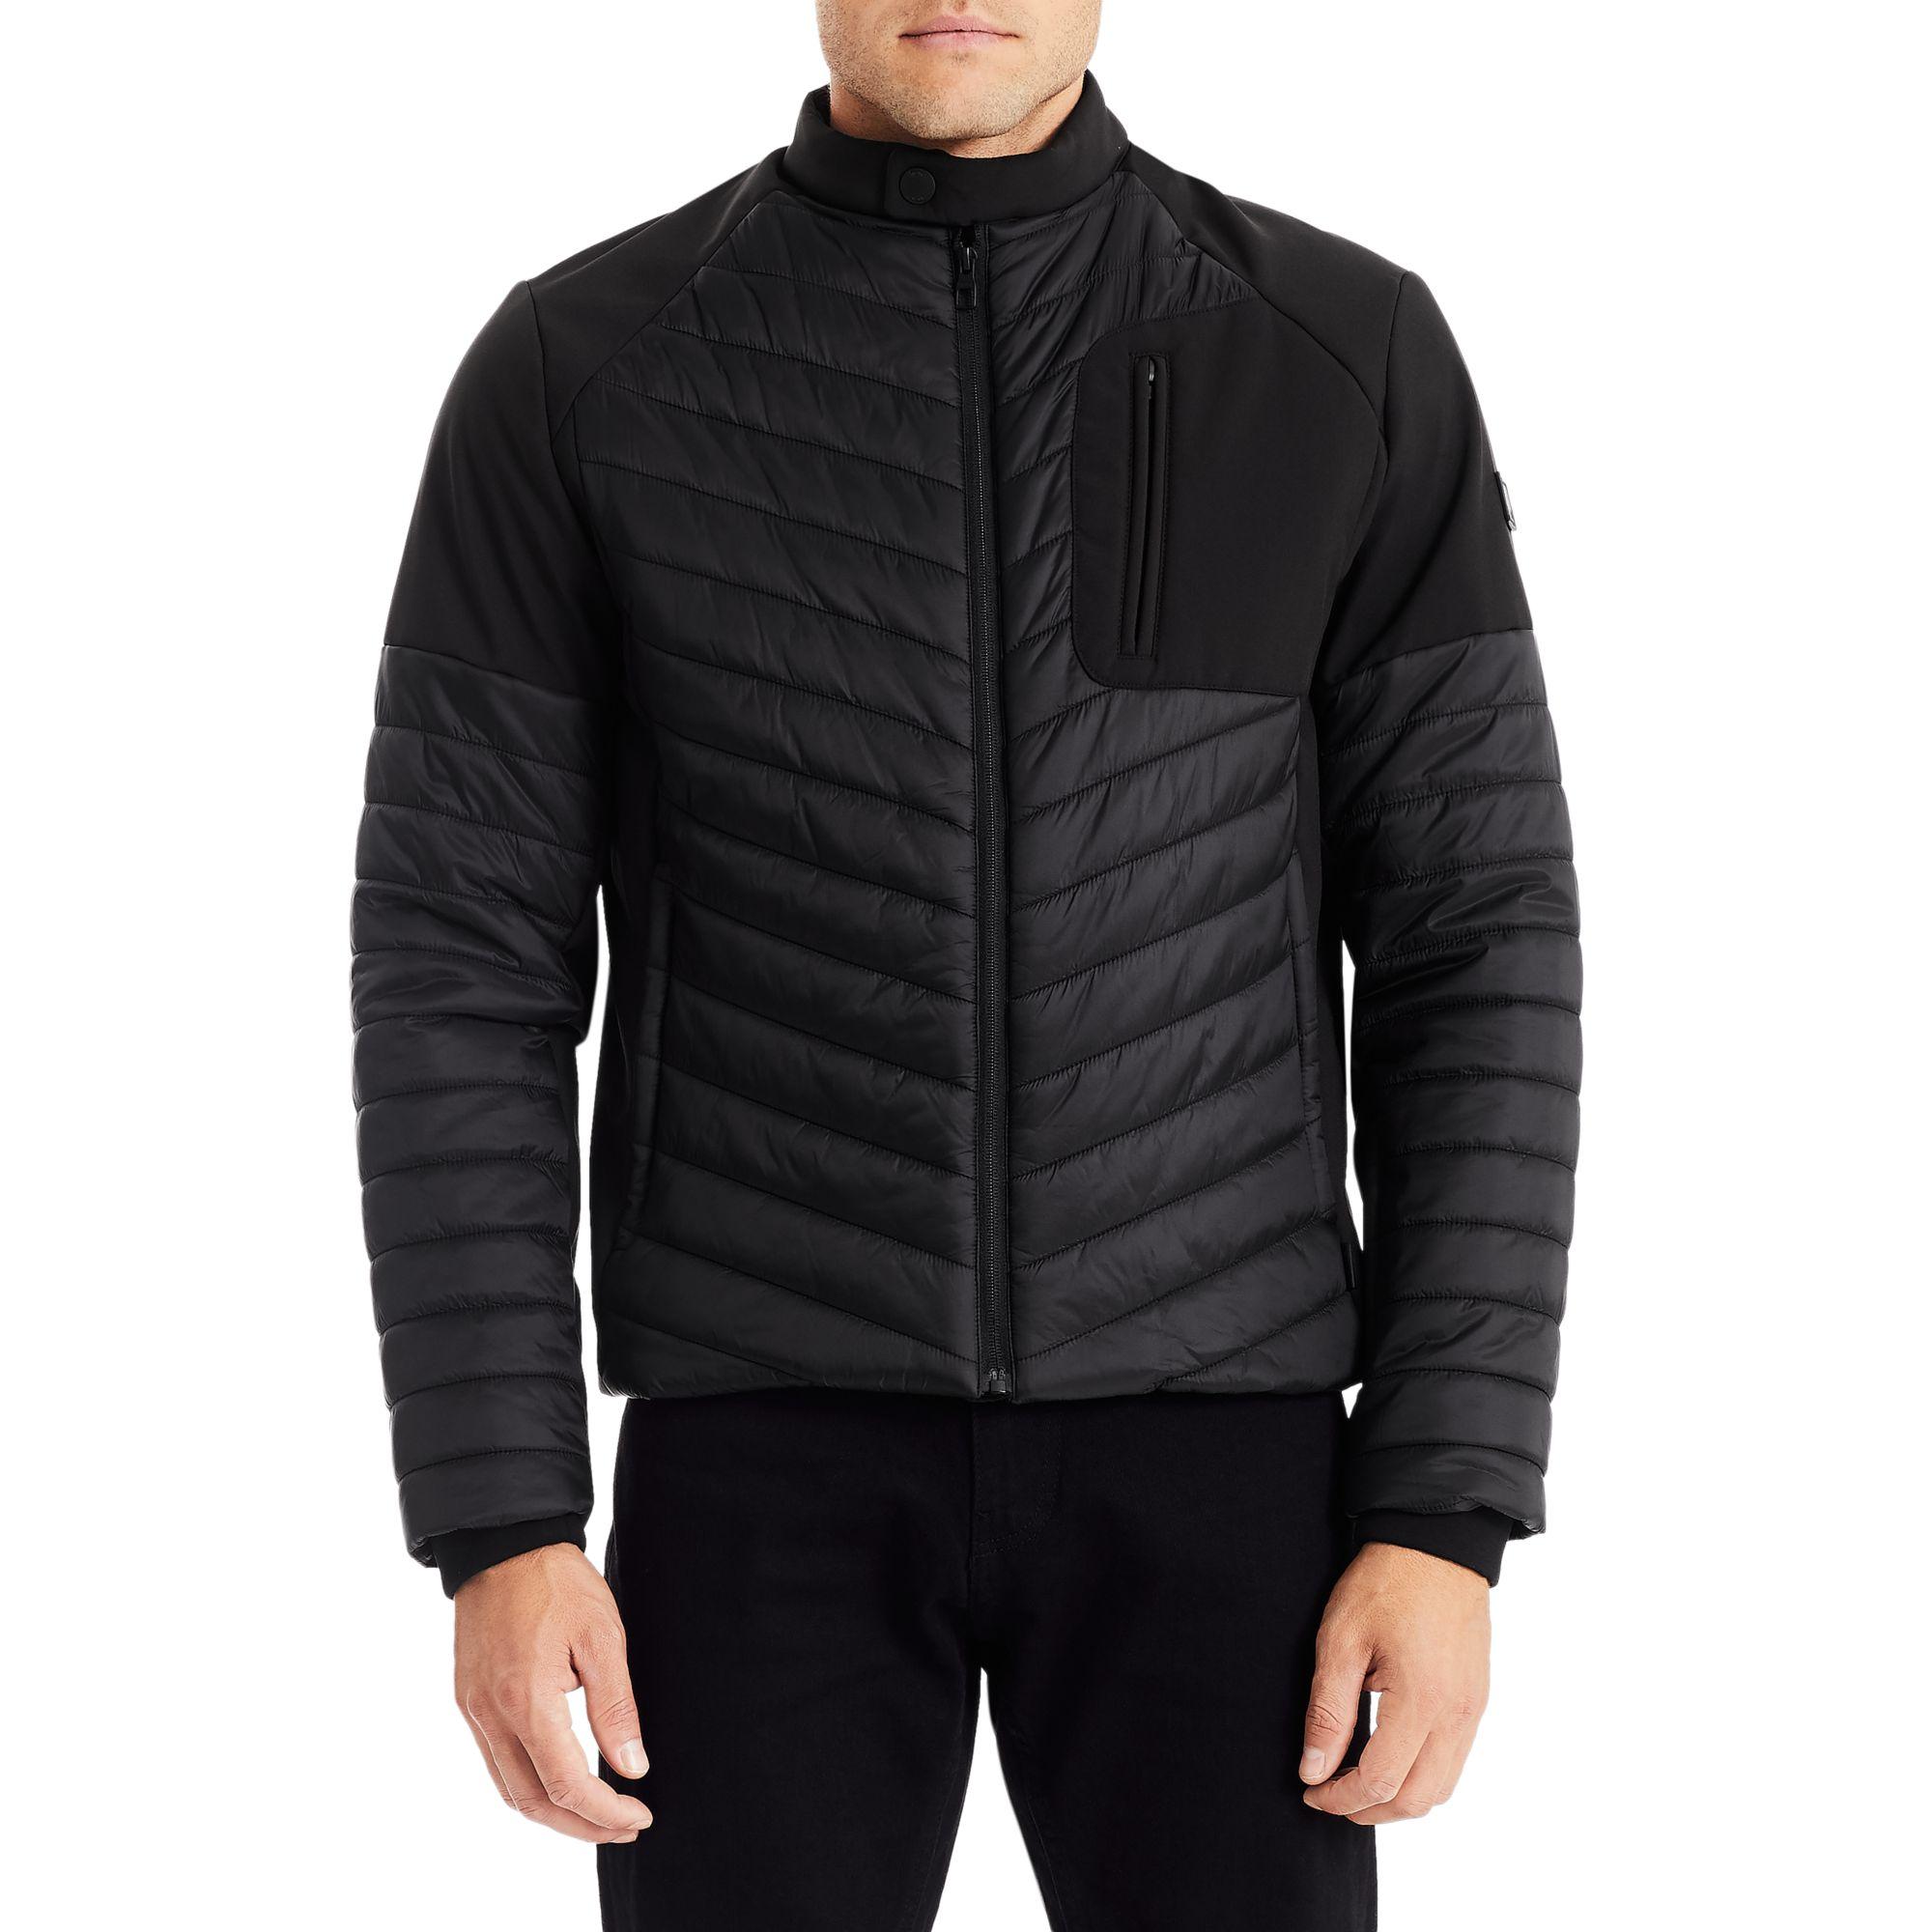 Tumi Synthetic Quilted Jacket in Black for Men - Lyst